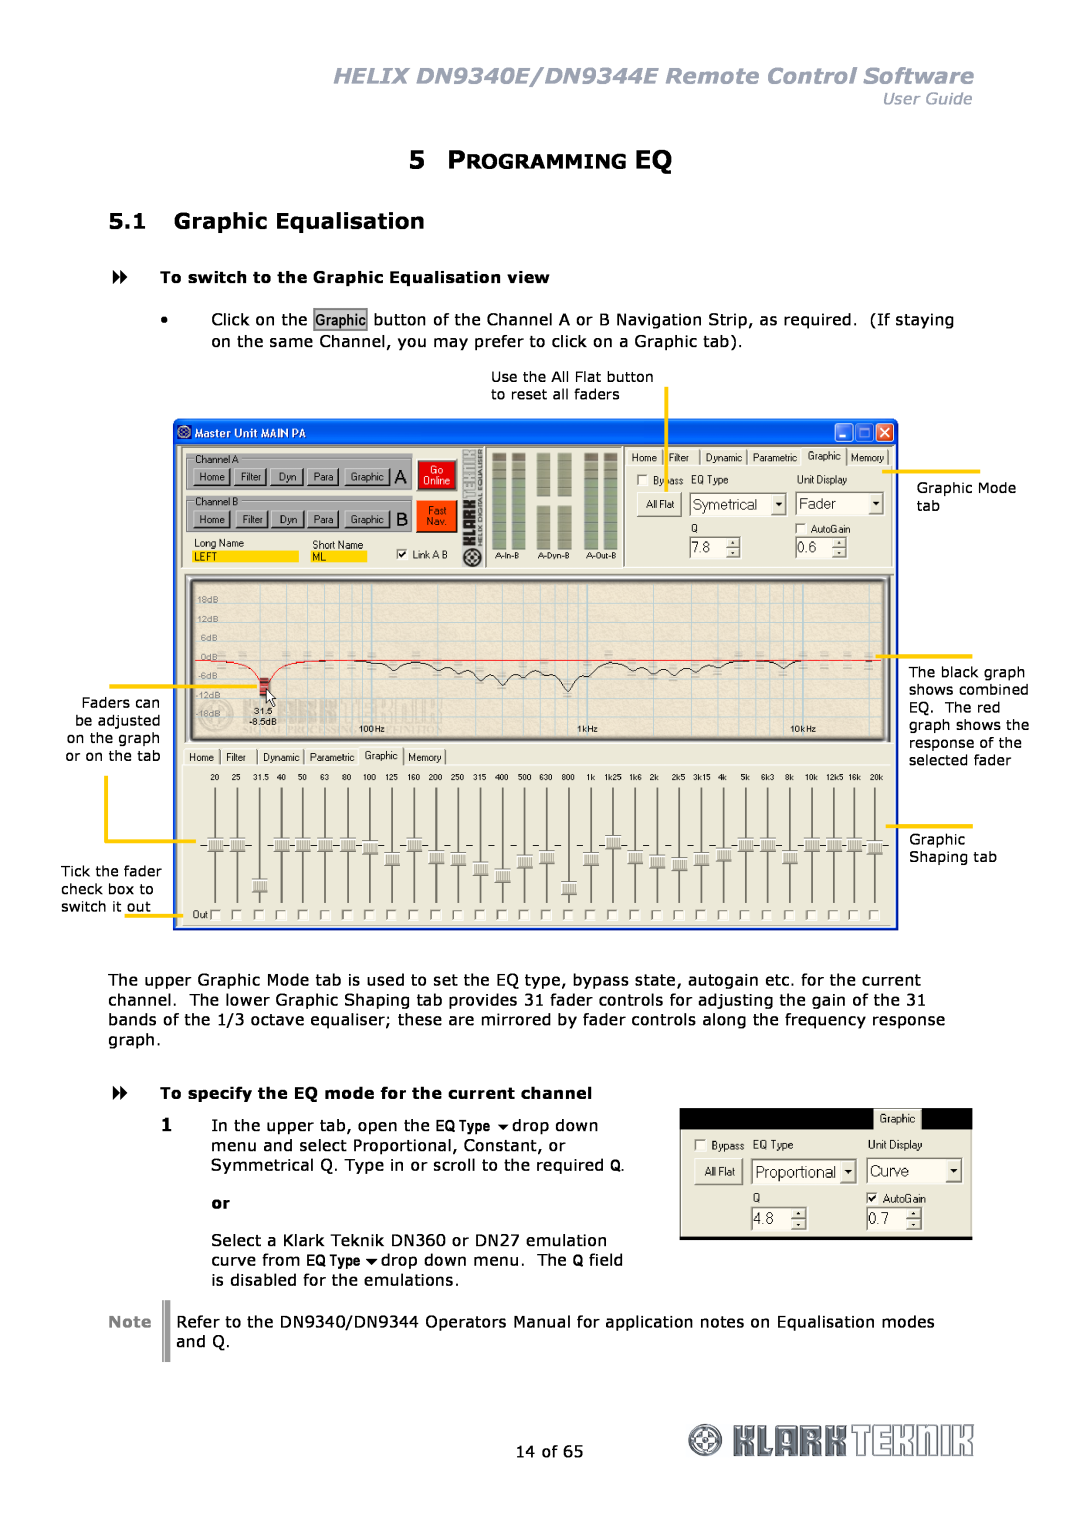 Klark Teknik DN9340E, DN9344E manual Programming Eq, To switch to the Graphic Equalisation view, User Guide 